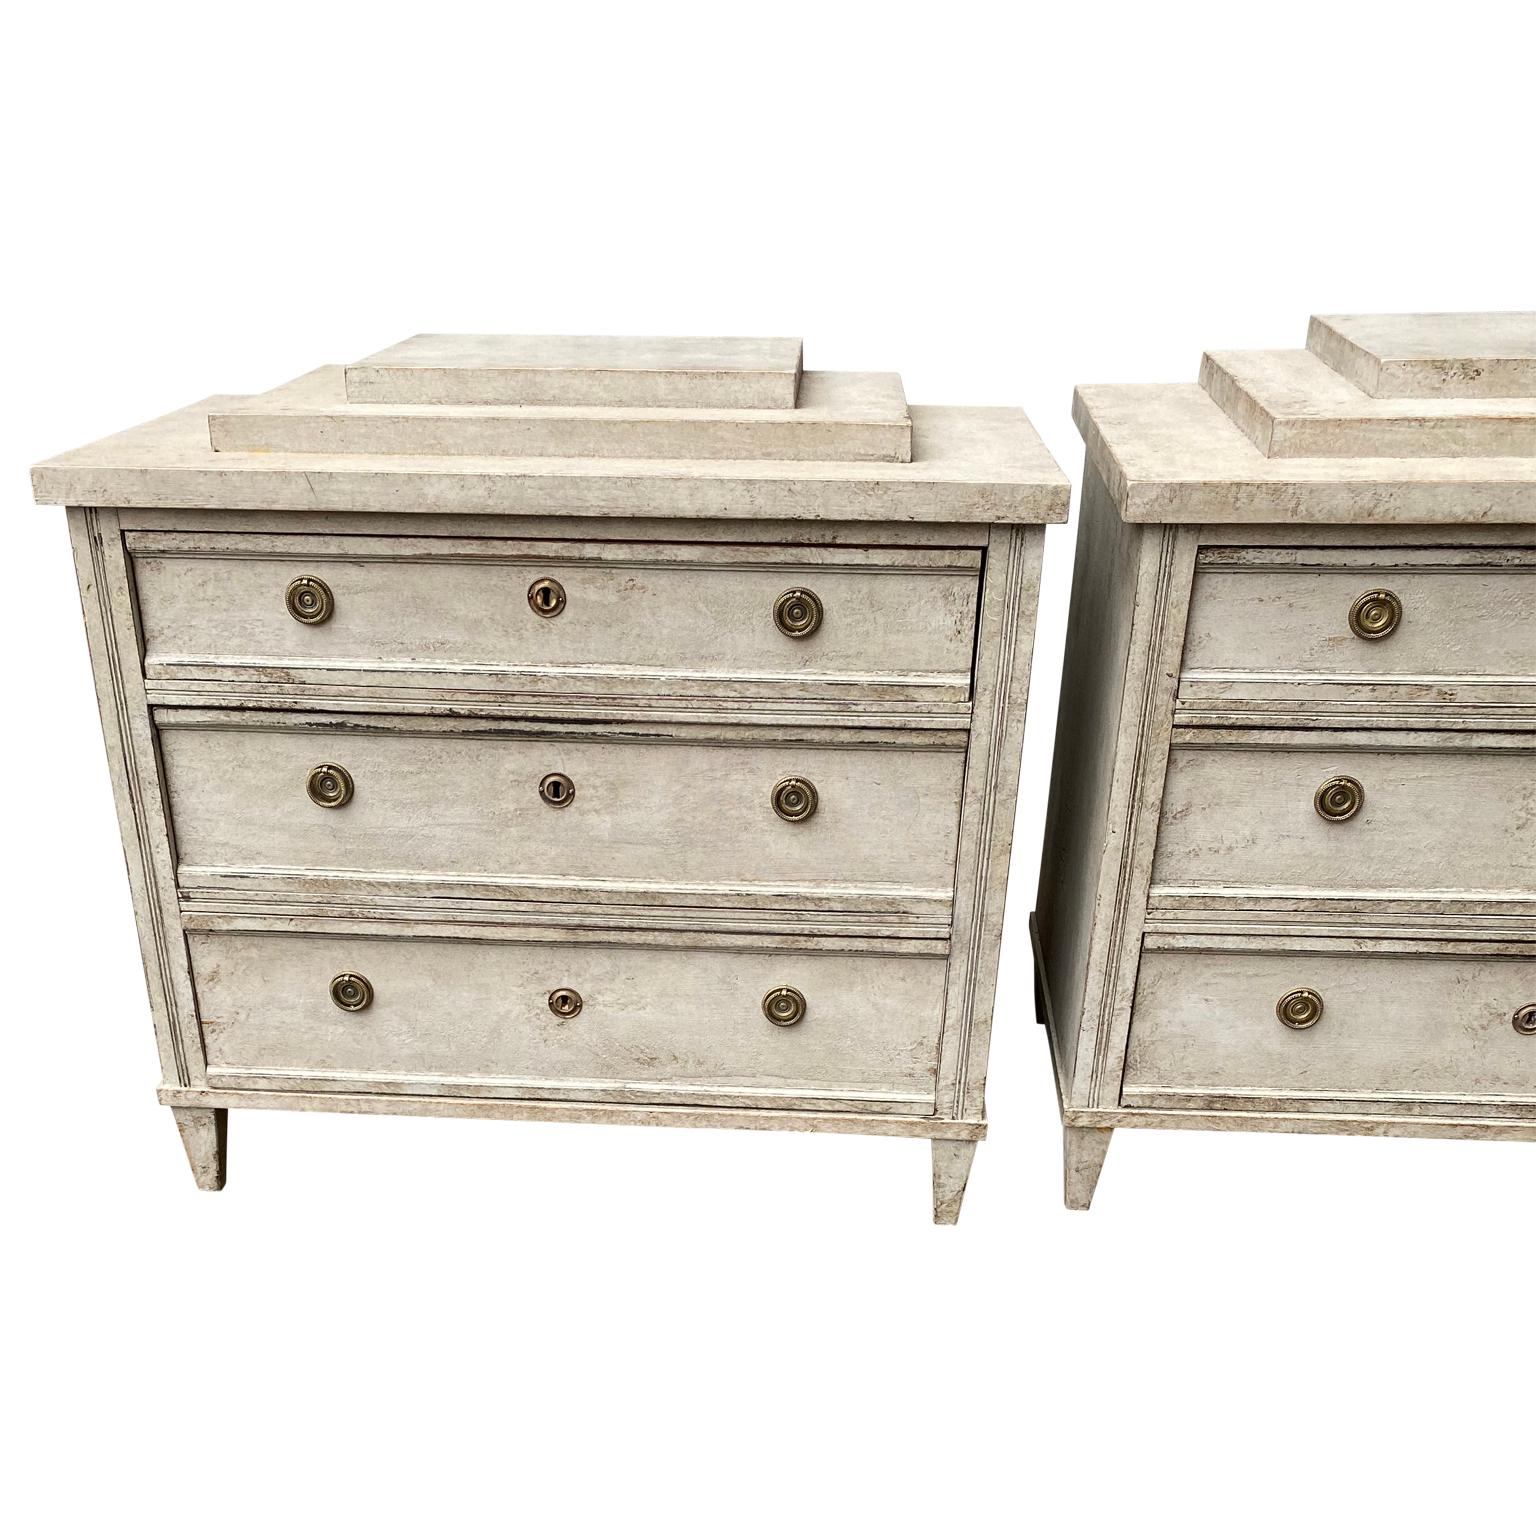 Pair of Gustavian style chest of drawers with pedestal top surface, also referred to as 